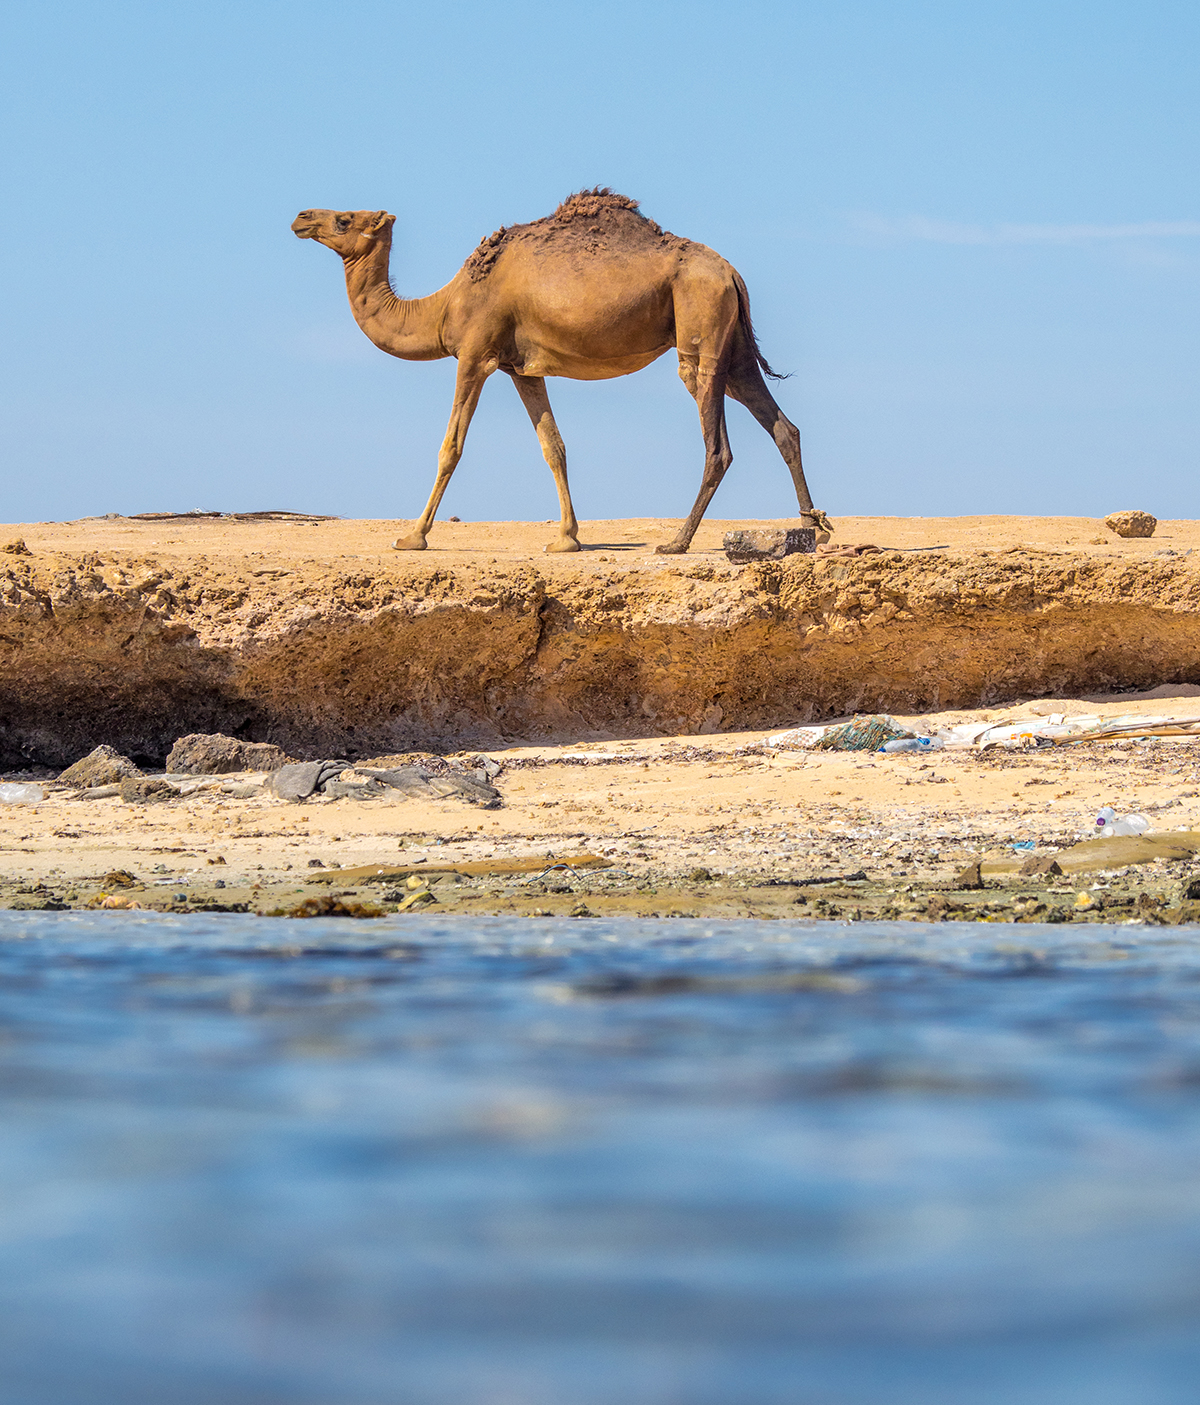 A camel walking by the sea